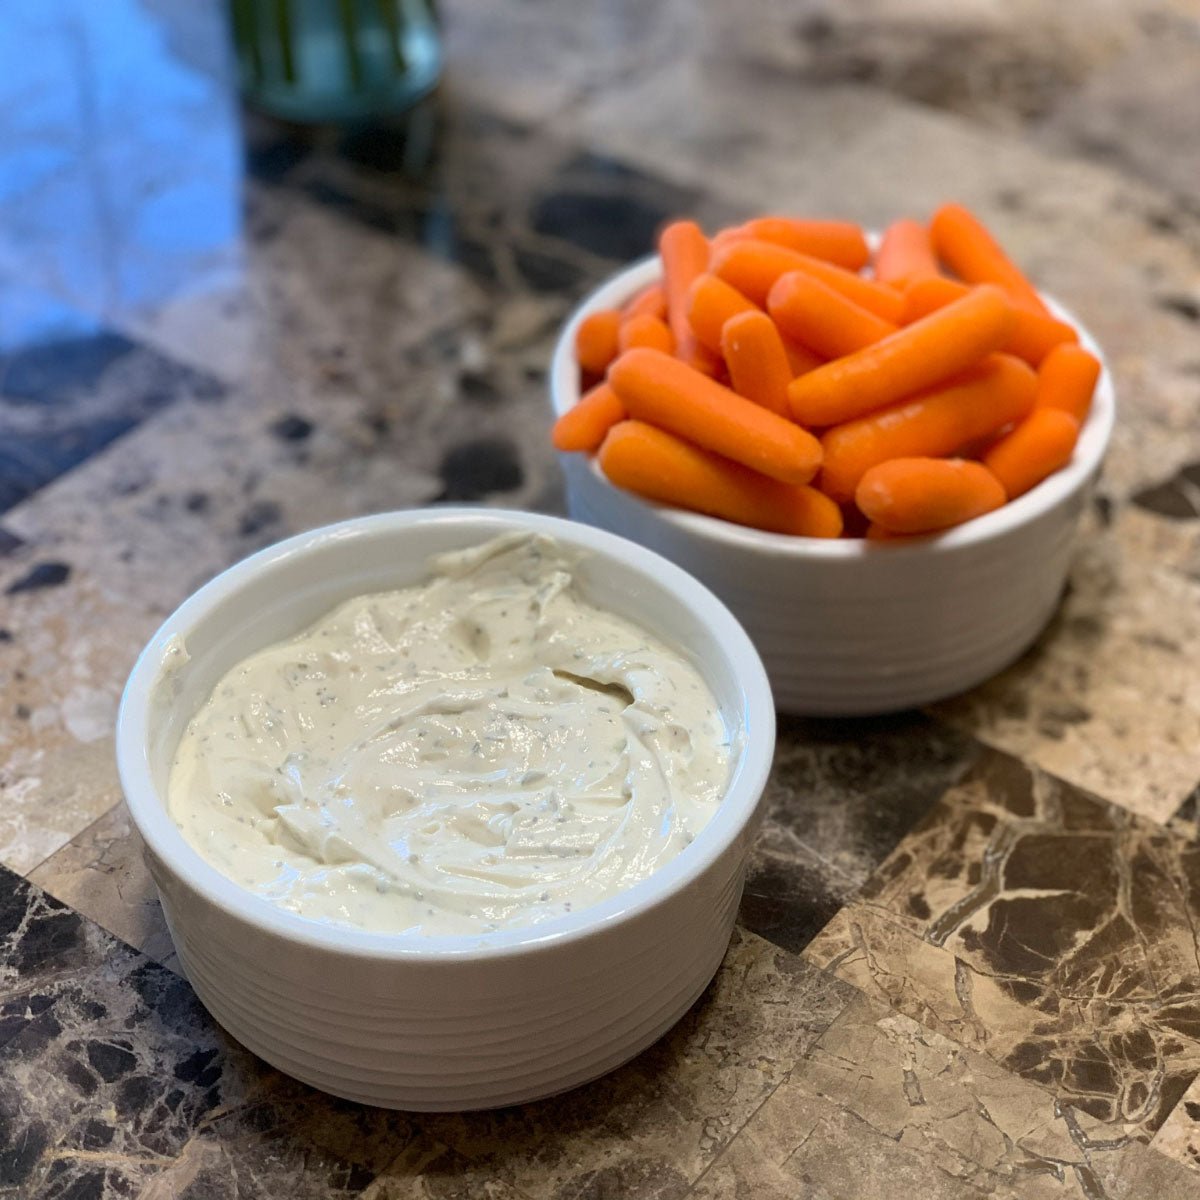 Spicy Ranch Dip - The Tool Store